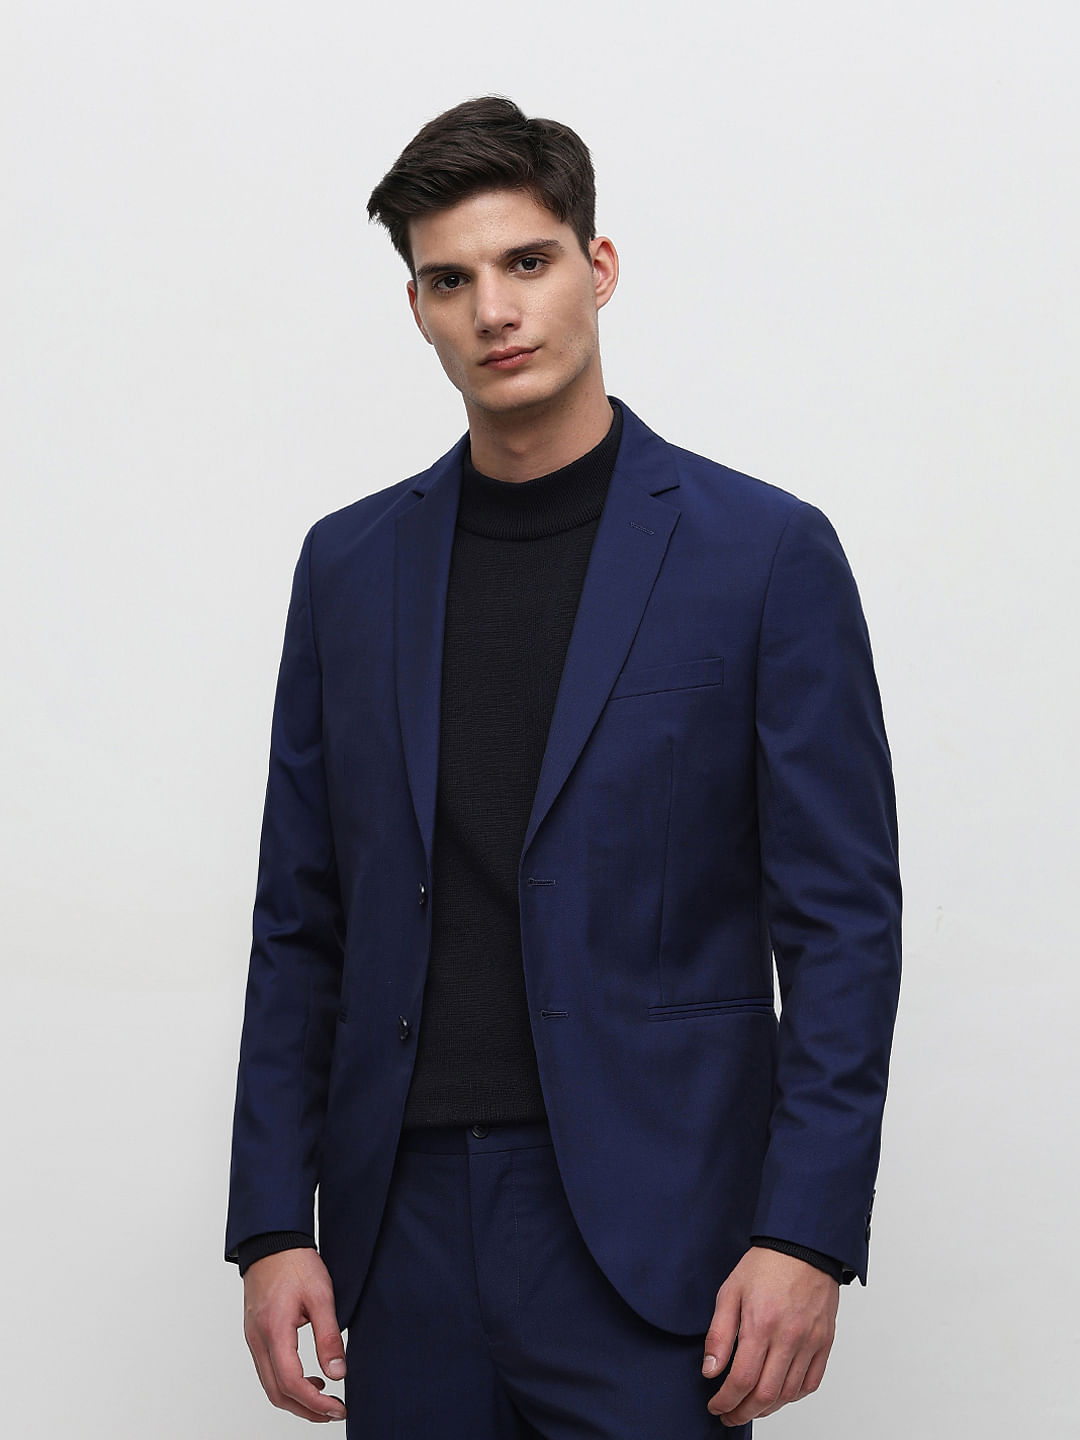 Dark Blue Slim Fit Mens Wedding Suit With Stripe Design Customizable Blue  Tuxedo Groom And Prom Suit Jacket And Pants From Dressvip, $85.43 |  DHgate.Com